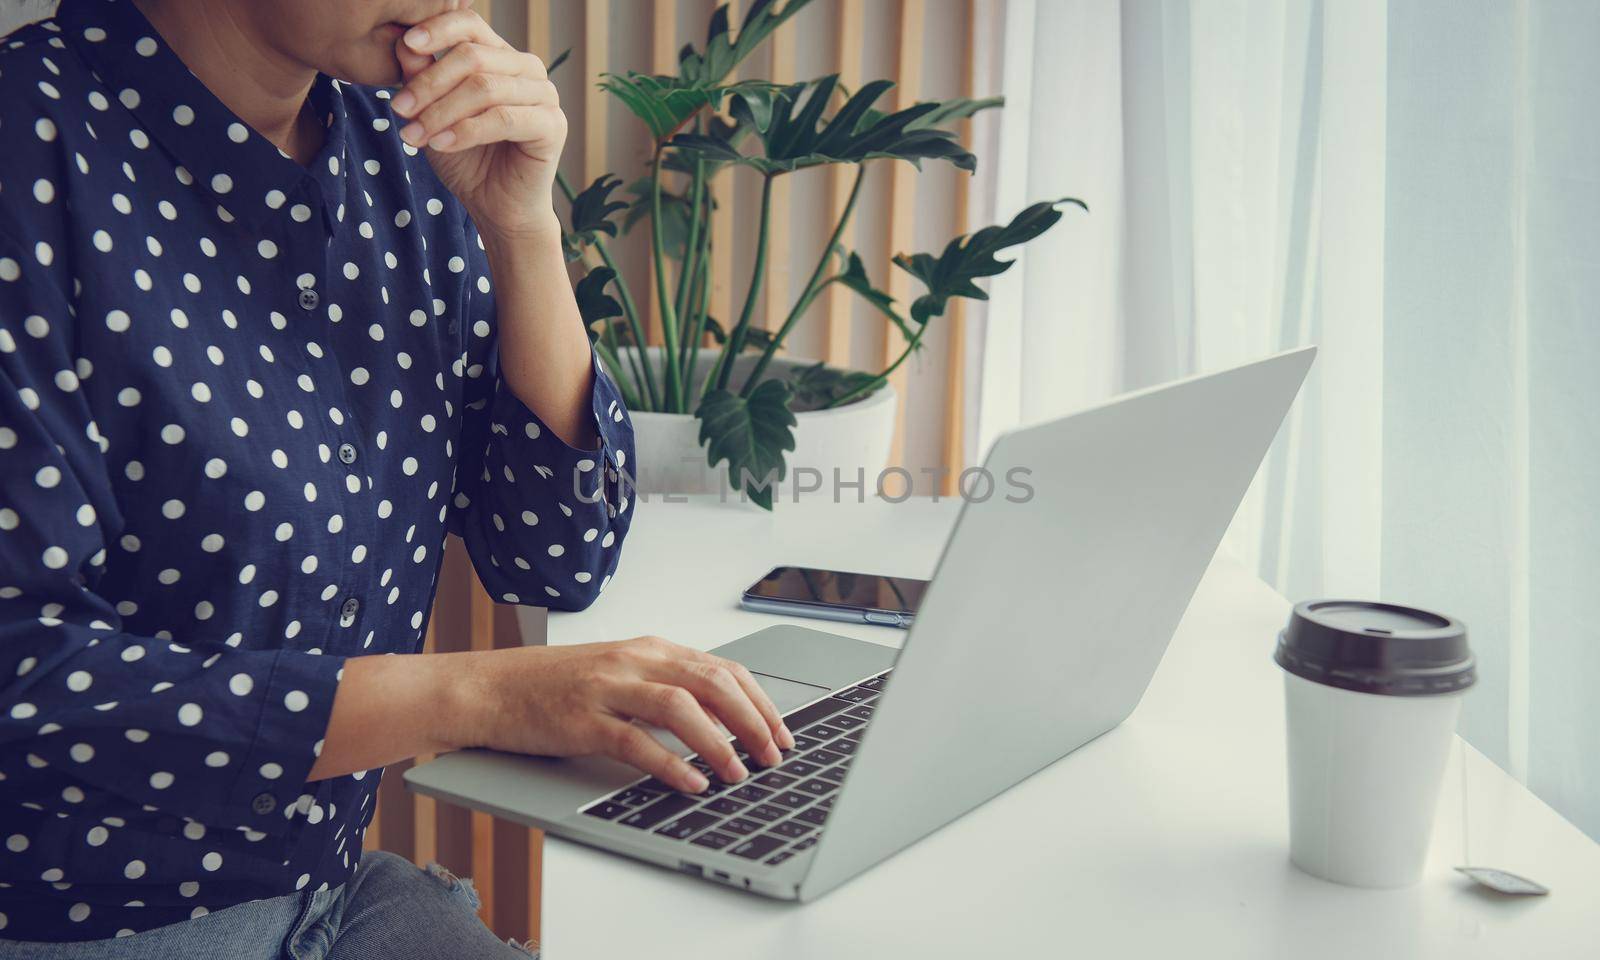 Woman using laptop and thinking about problem solution.Stay at home and work from home concept during Coronavirus pandemic. by thanumporn